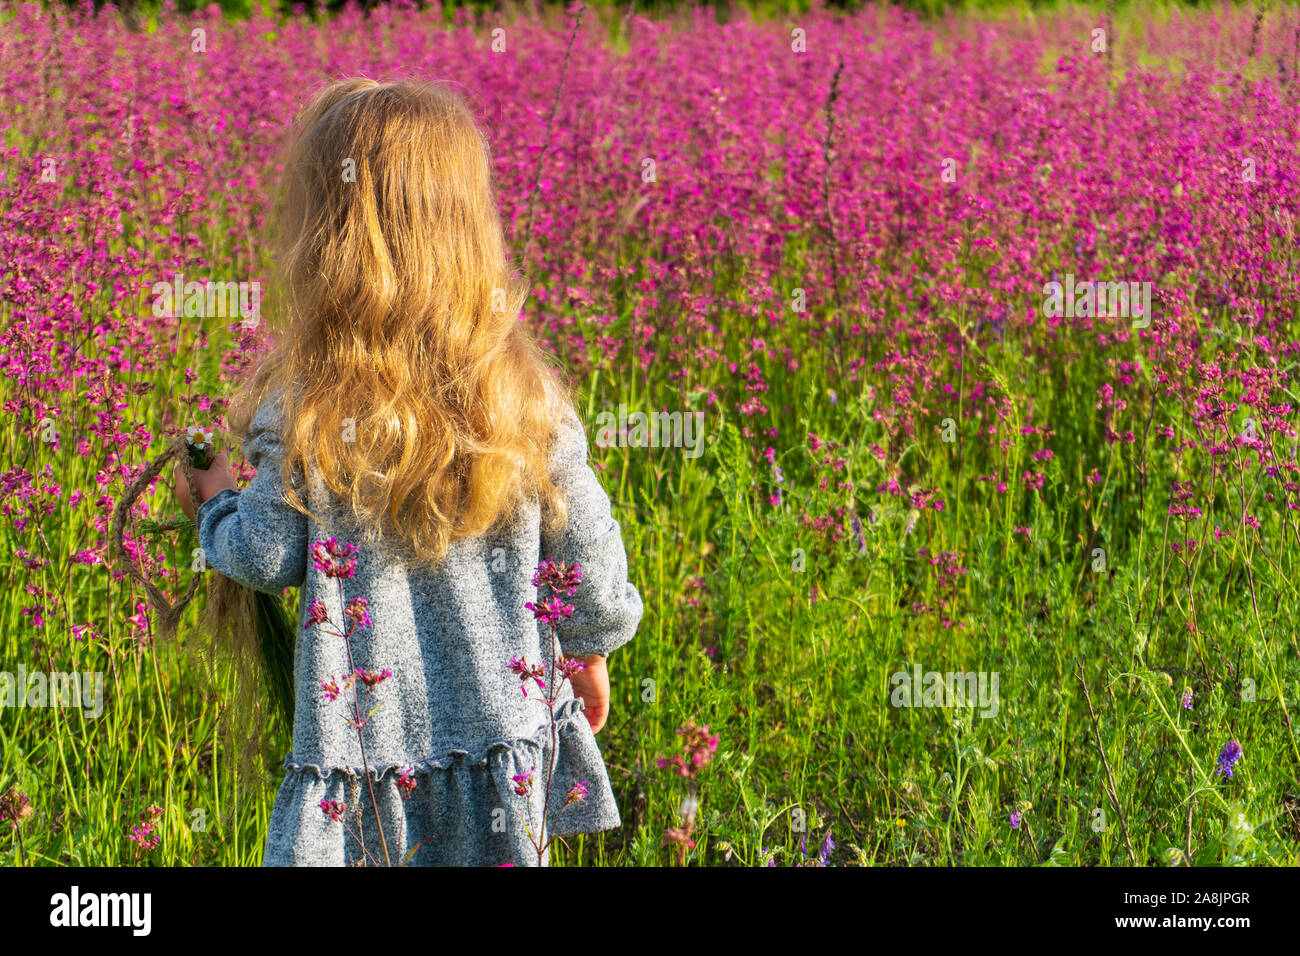 Little kid girl standing in the field of pink flowers Stock Photo